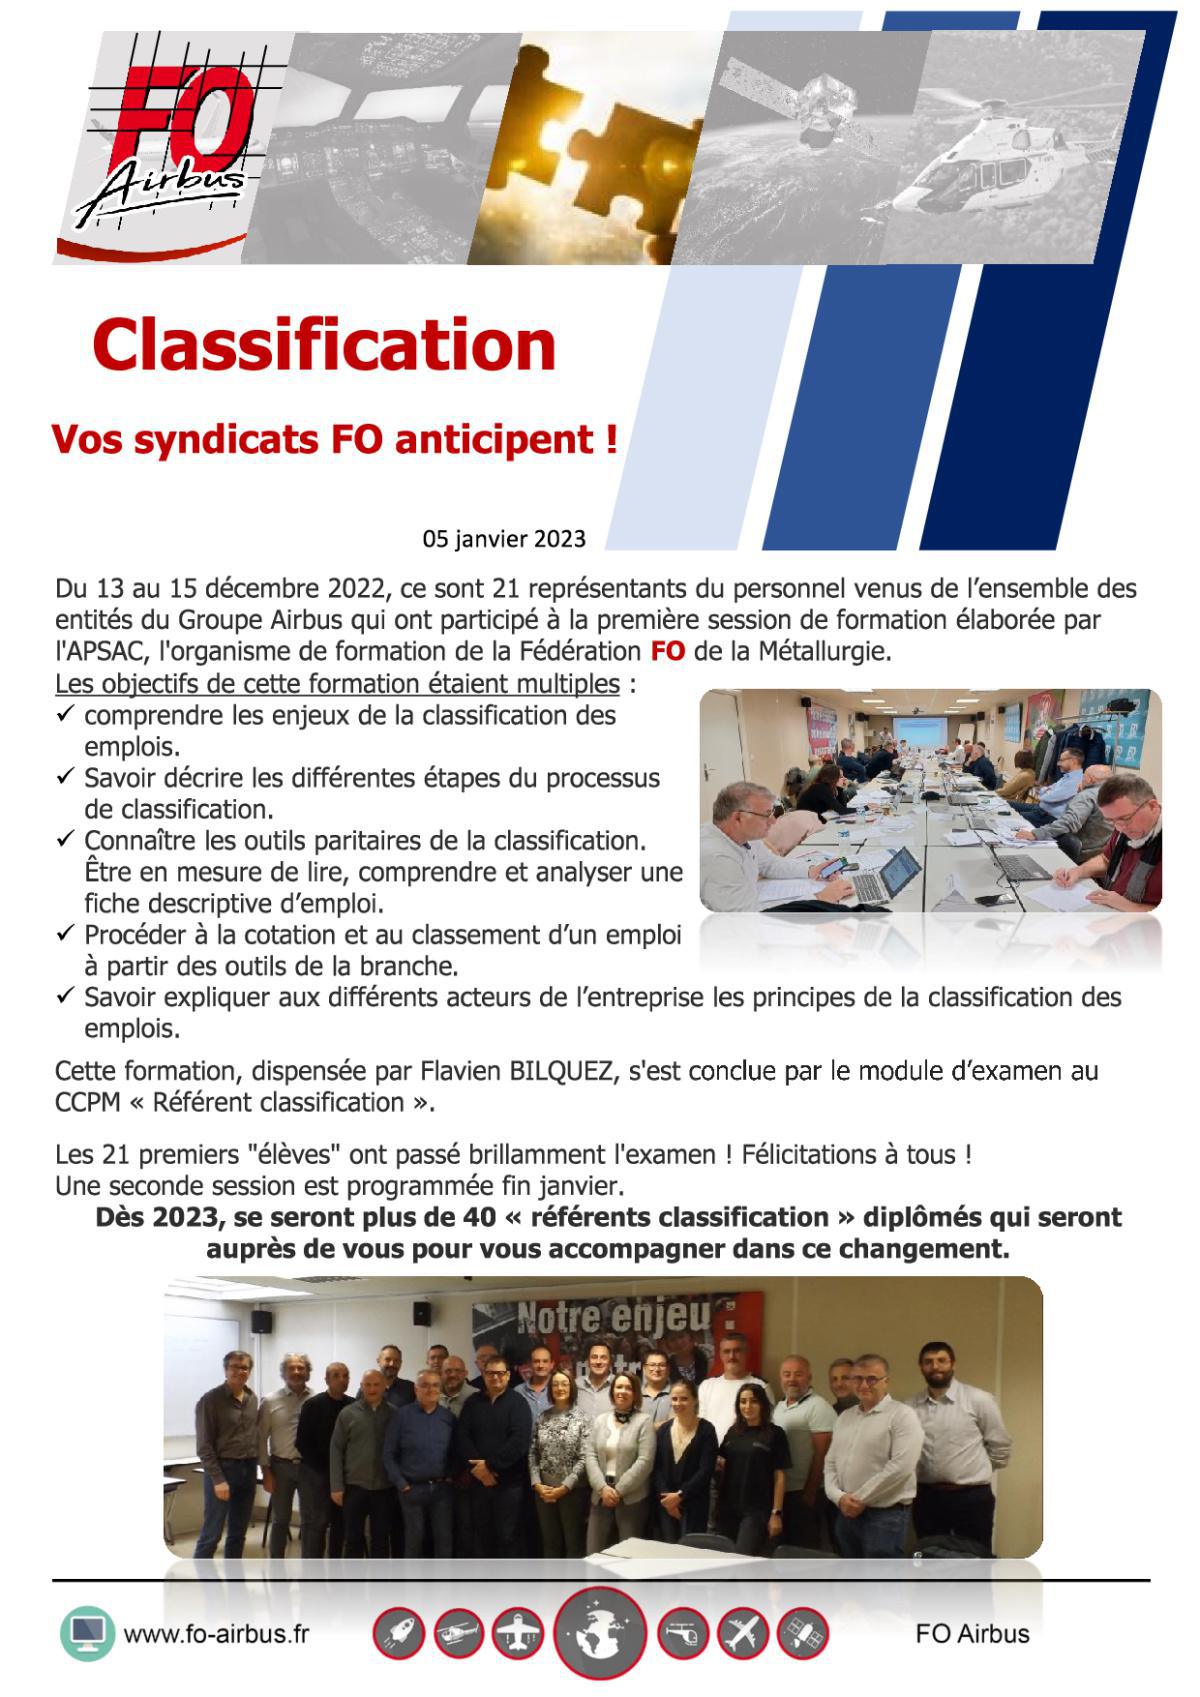 Classification : Vos syndicats FO anticipent !